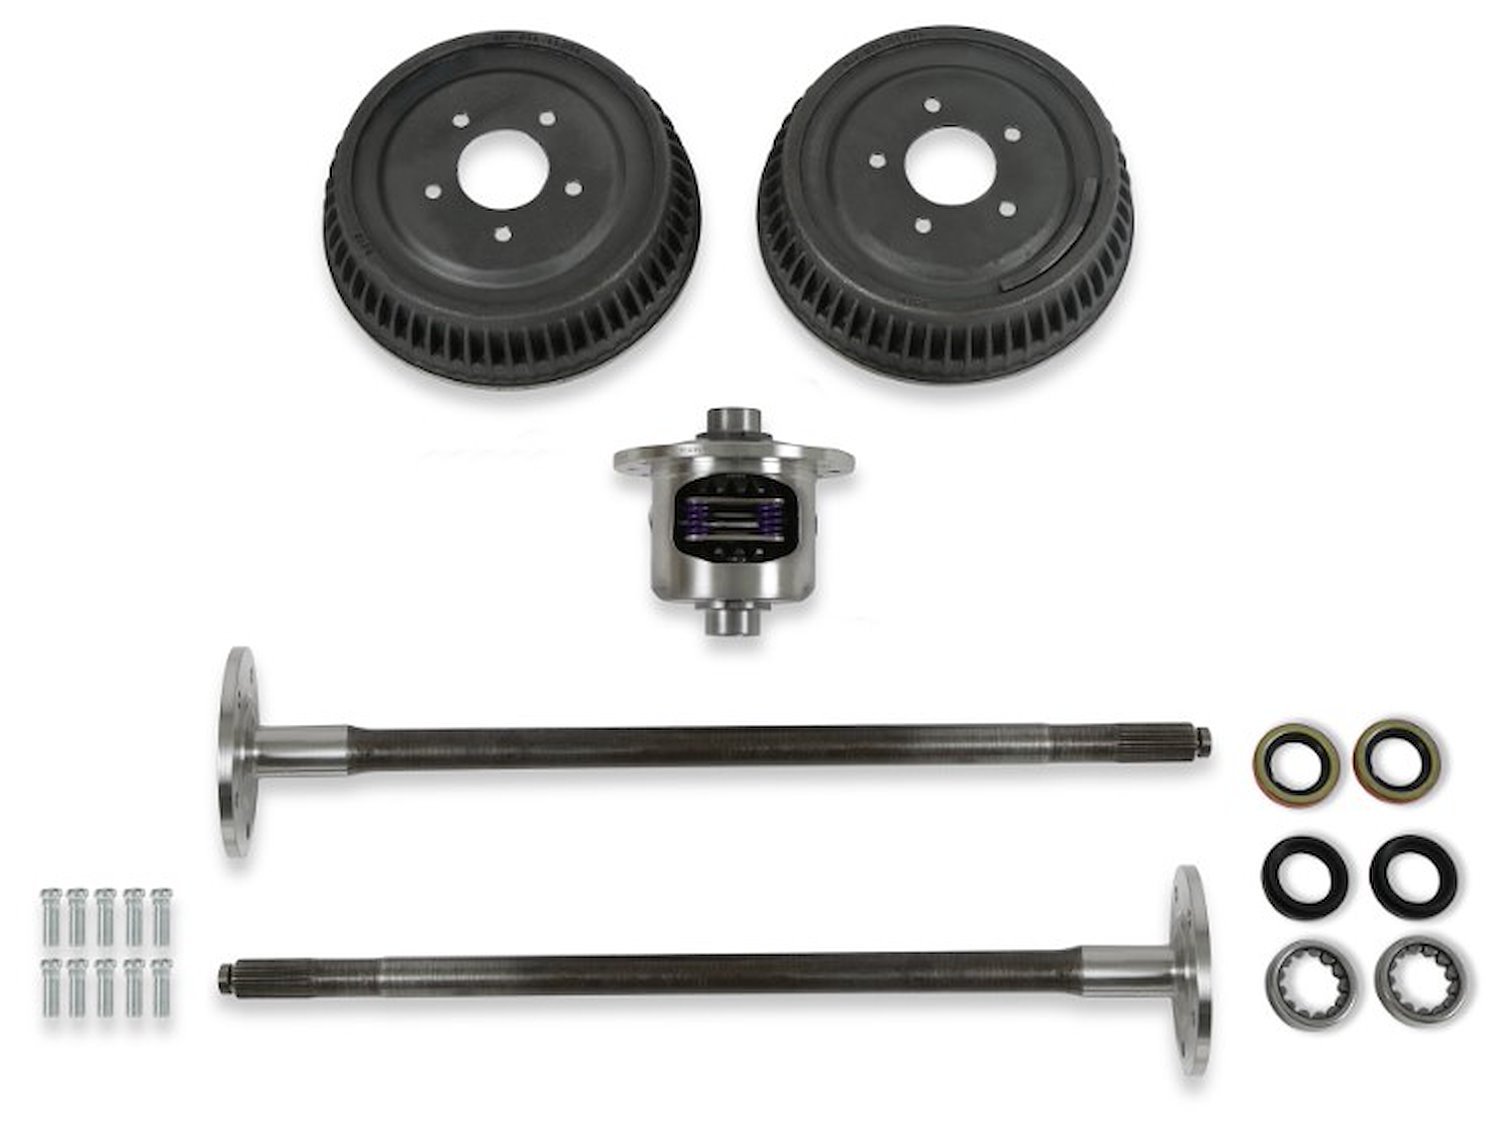 5-Lug Conversion Rear Axle Kit for 1963-1969 Chevy, GMC Trucks/SUVs 2WD/4WD w/Limited Slip Differential for 3.42 Gears & Below